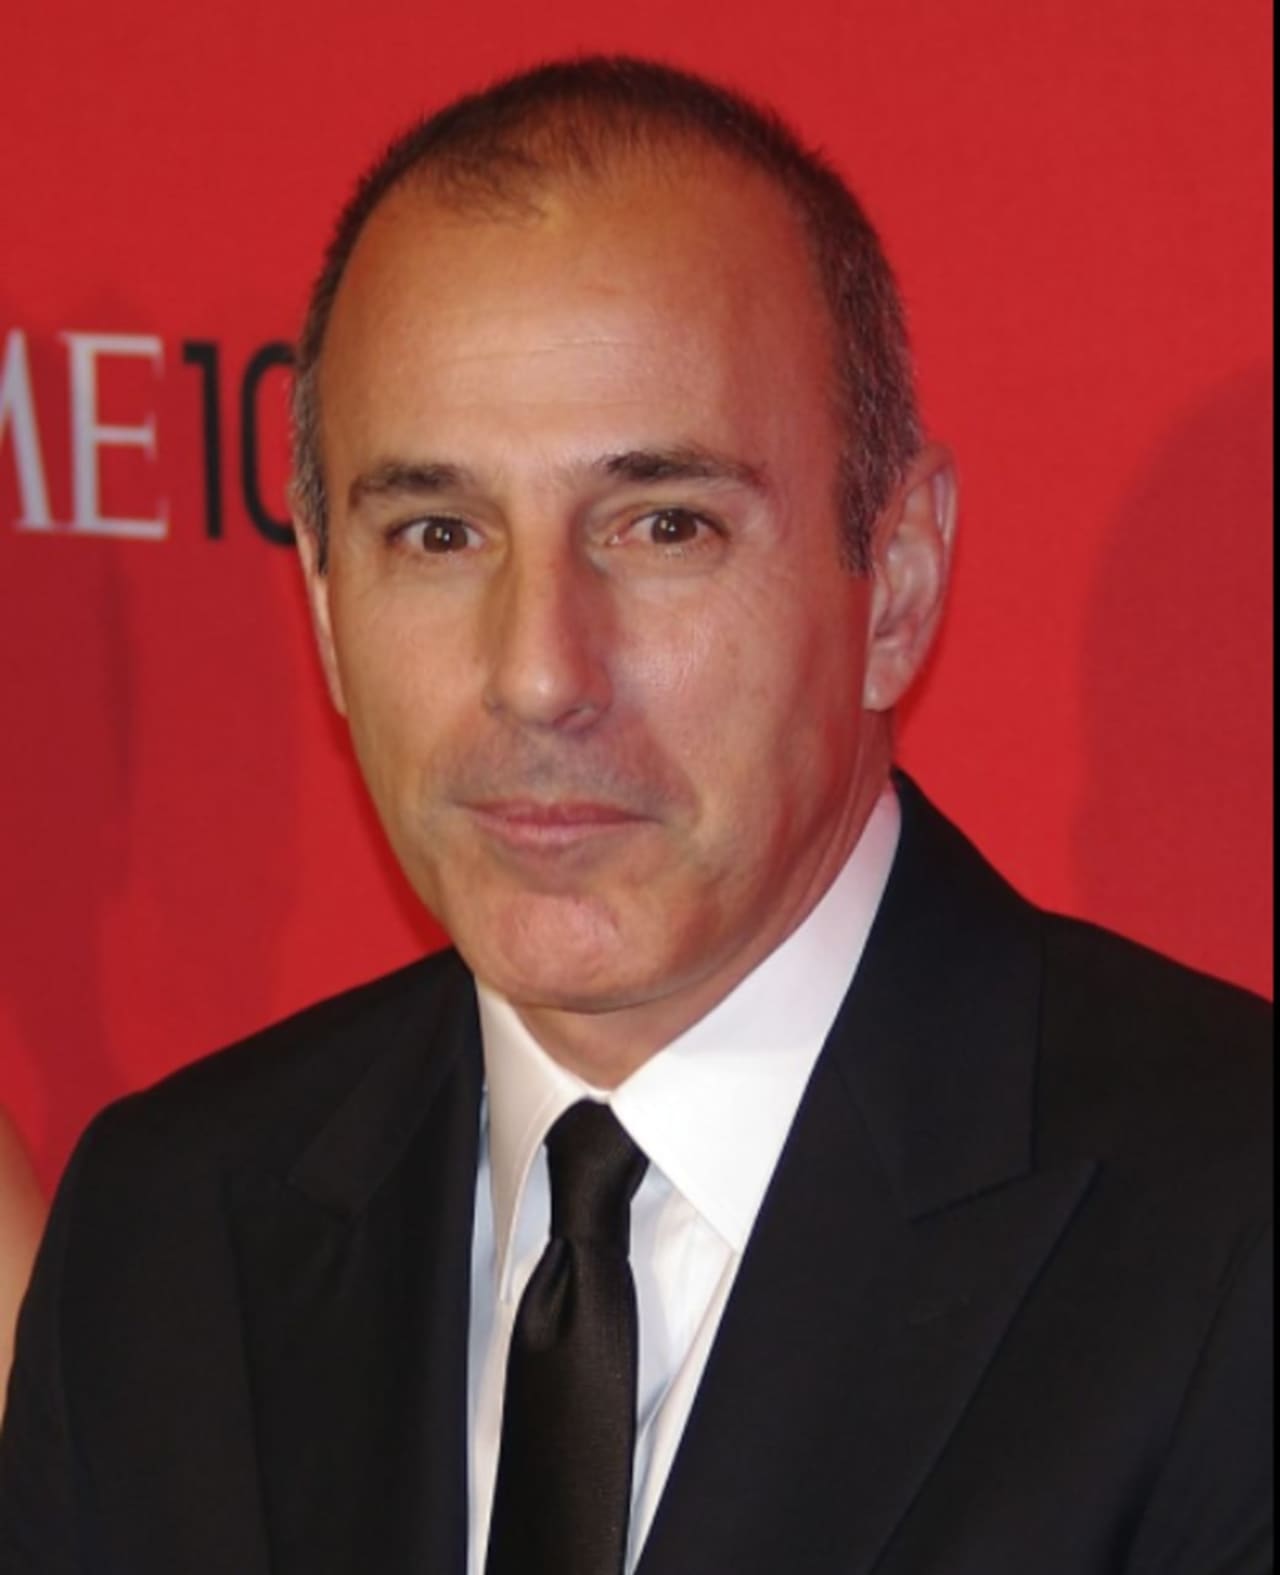 Matt Lauer, a Hartsdale native, has his Upper East Side apartment for sale.